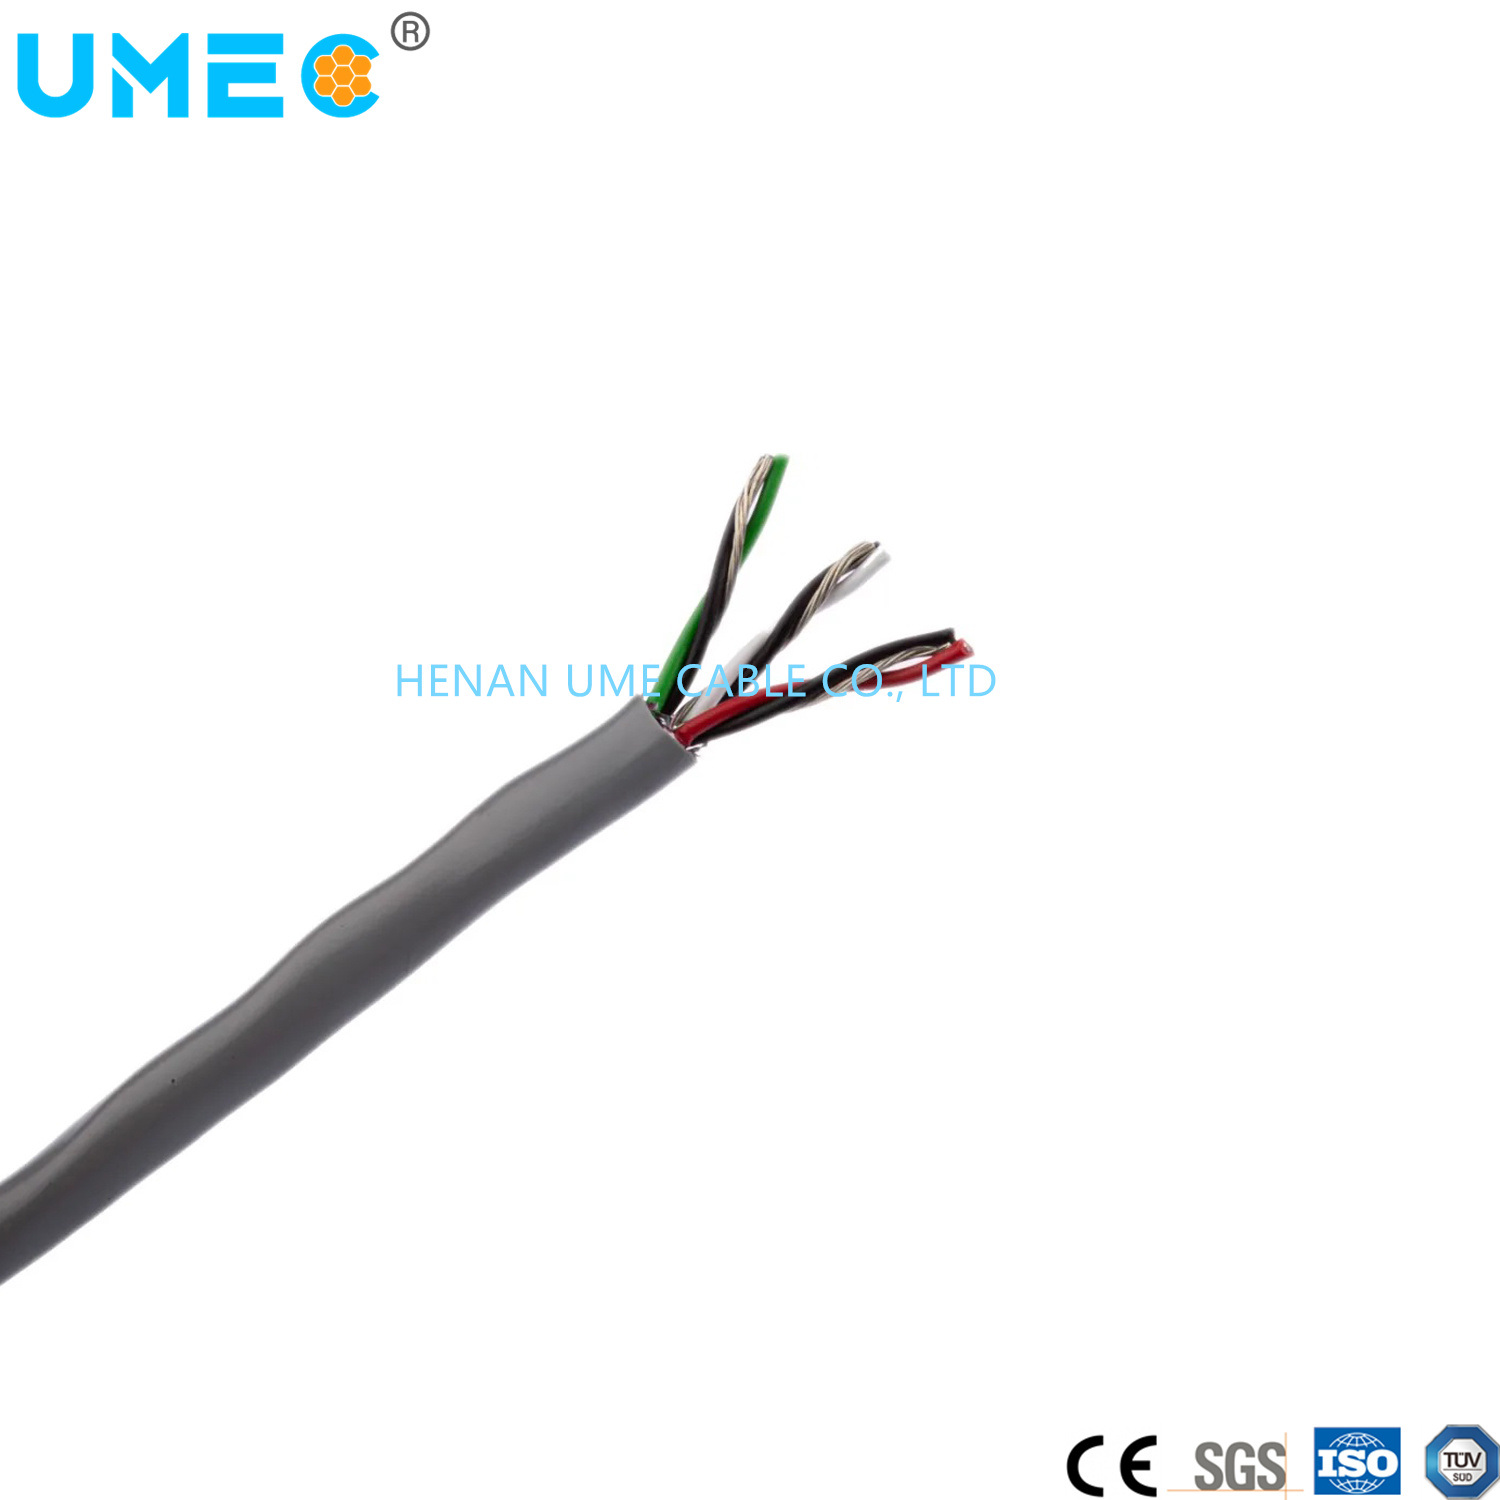 Audio, Control & Instrument Power Cable PP Insulation Type 8777 Eca Cable